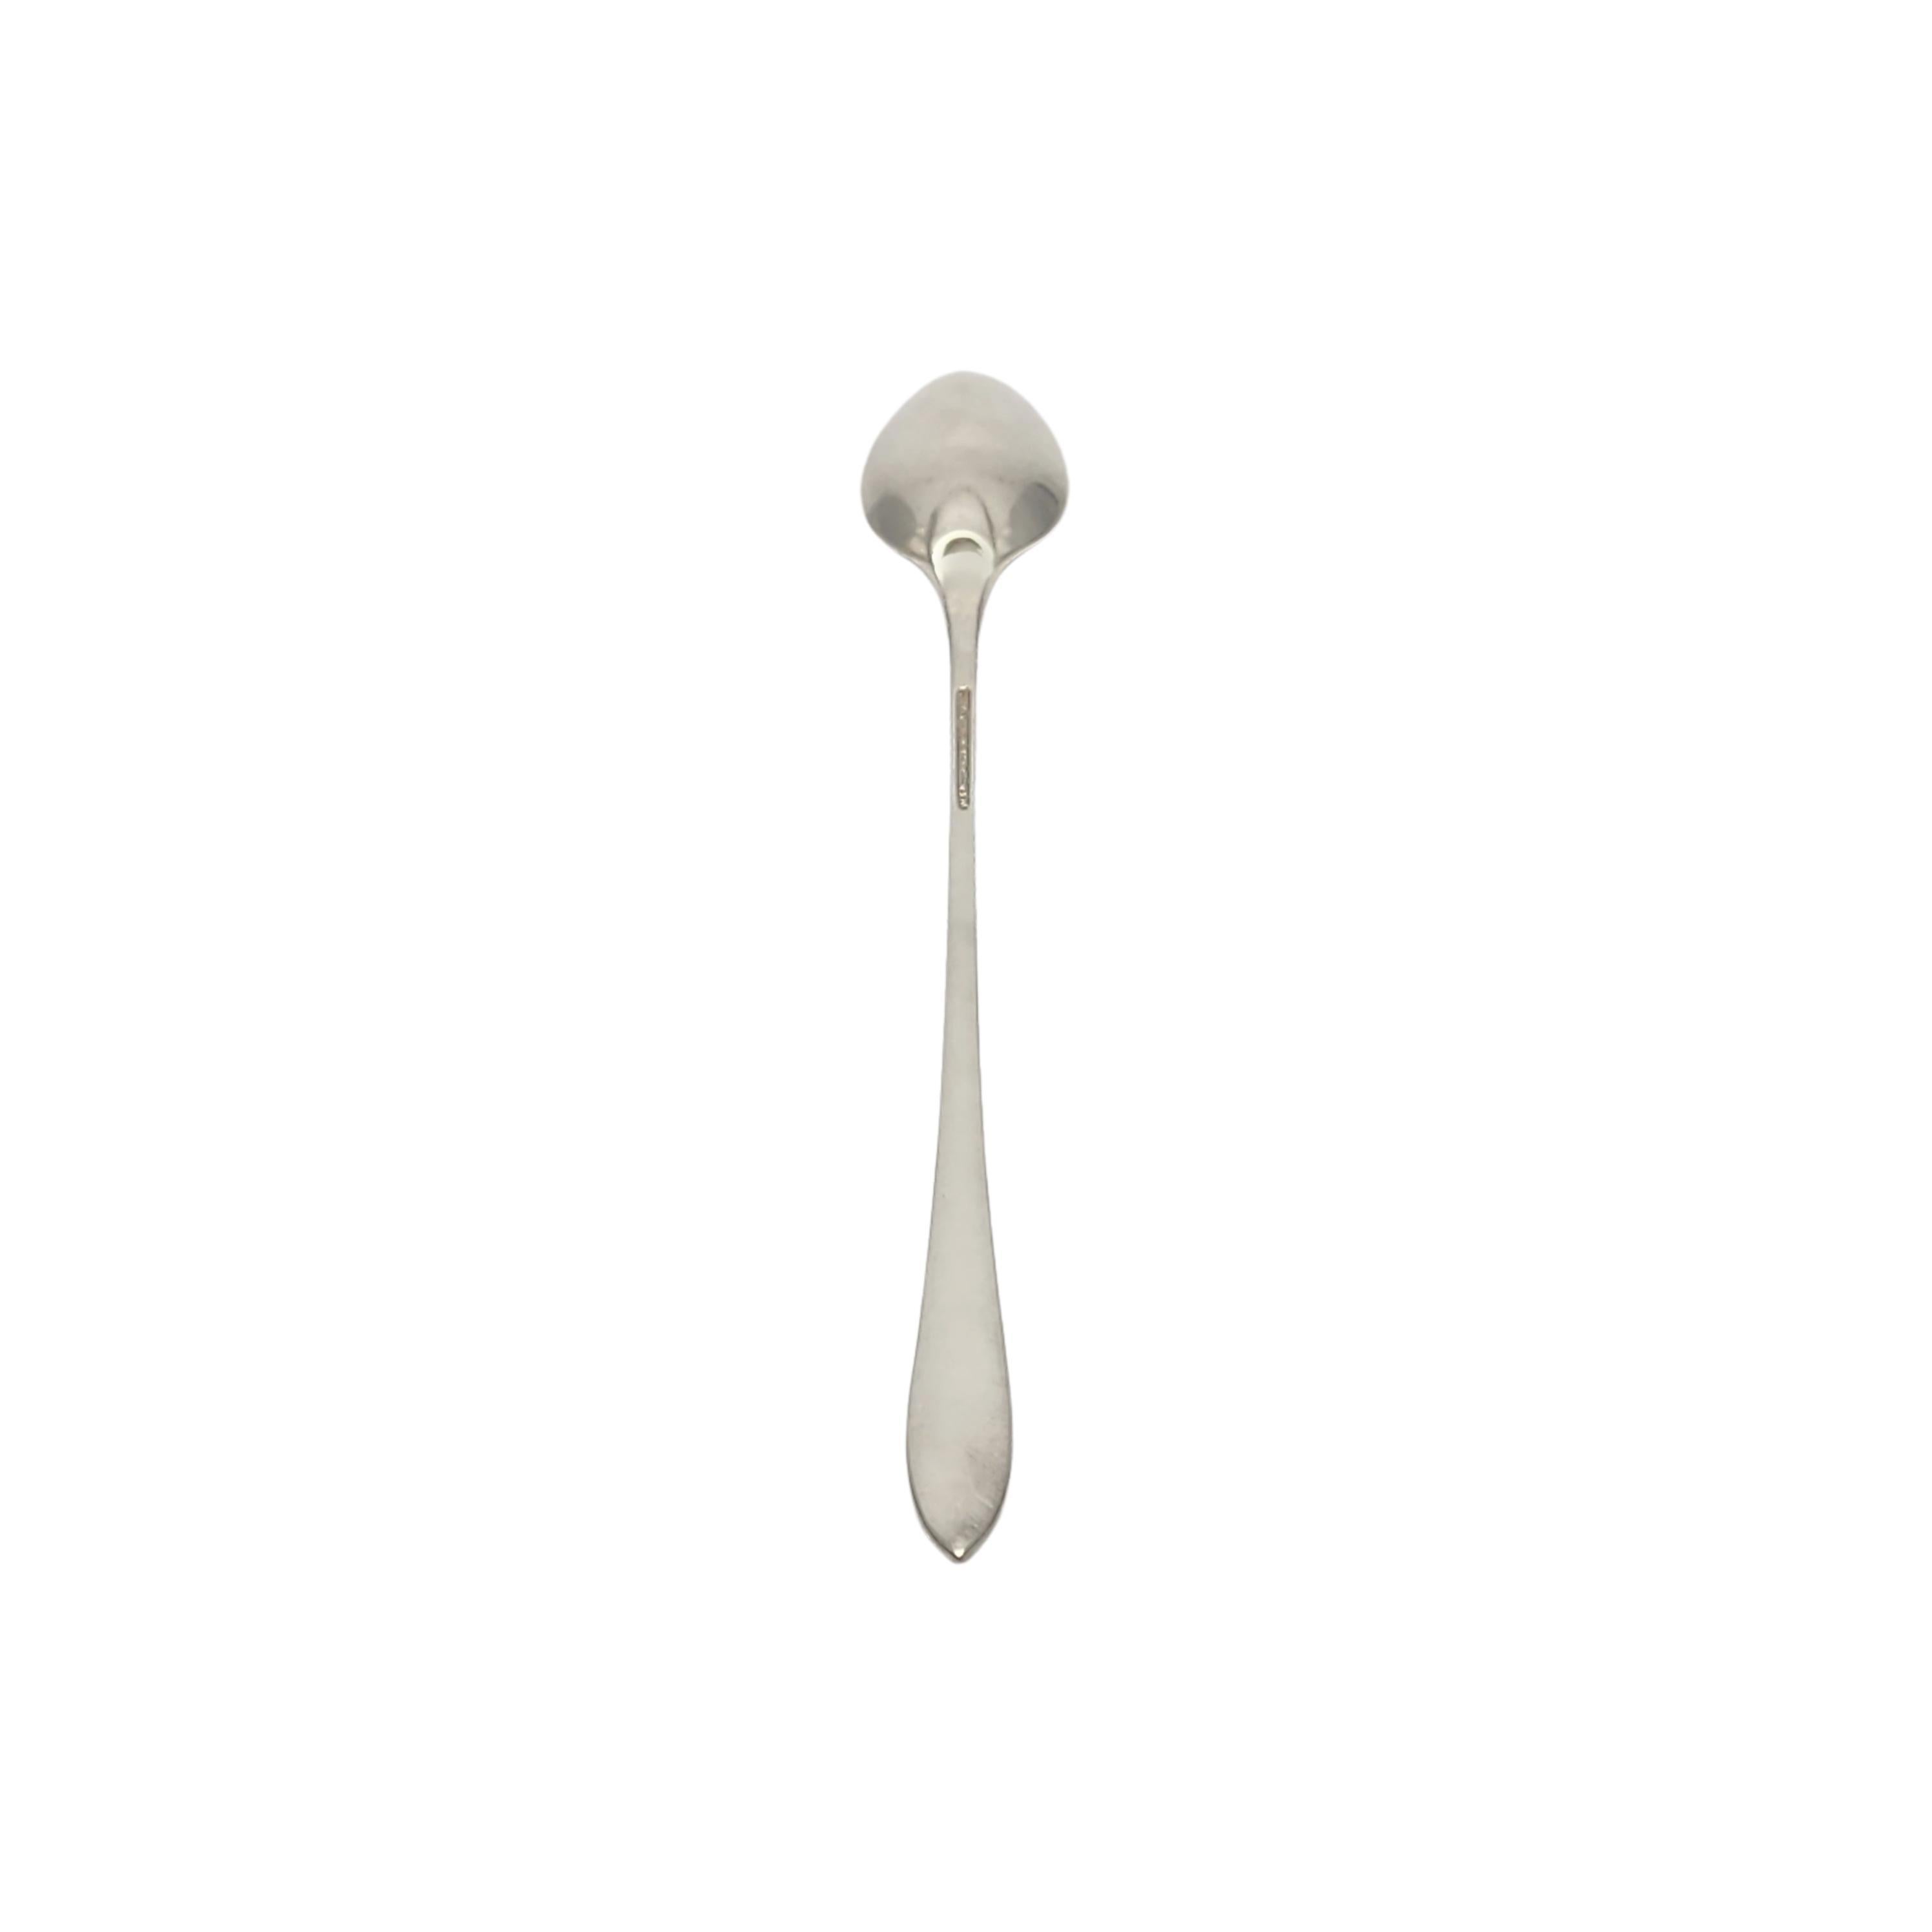 Tiffany & Co sterling silver baby feeding spoon in the Faneuil pattern.

No monogram or engraving.

The Faneuil pattern was in production from 1910-1955 and was named for Faneuil Hall in Boston, MA. The pattern's simple and elegant design makes it a